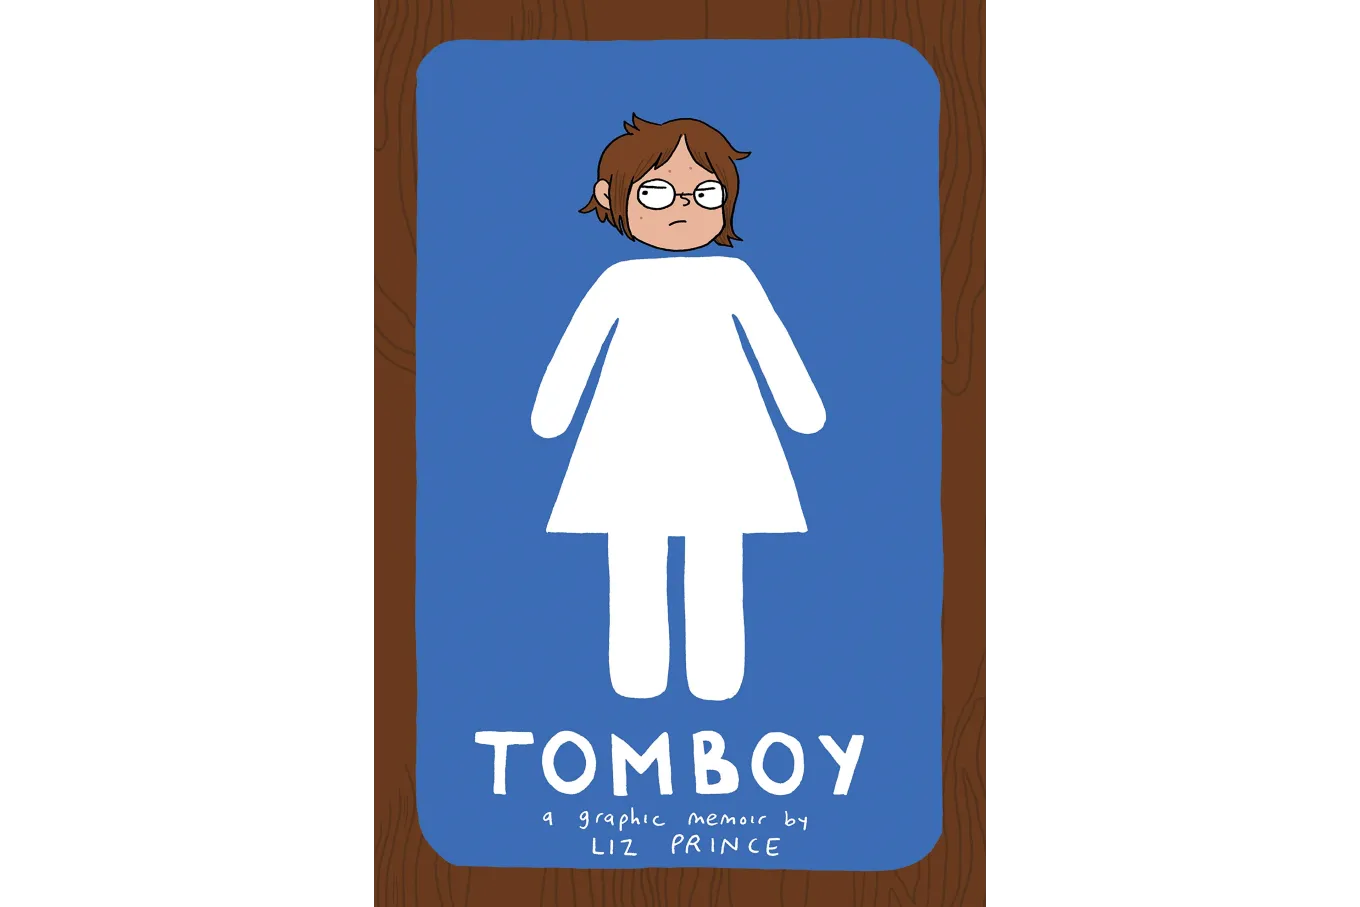 Cover of Tomboy